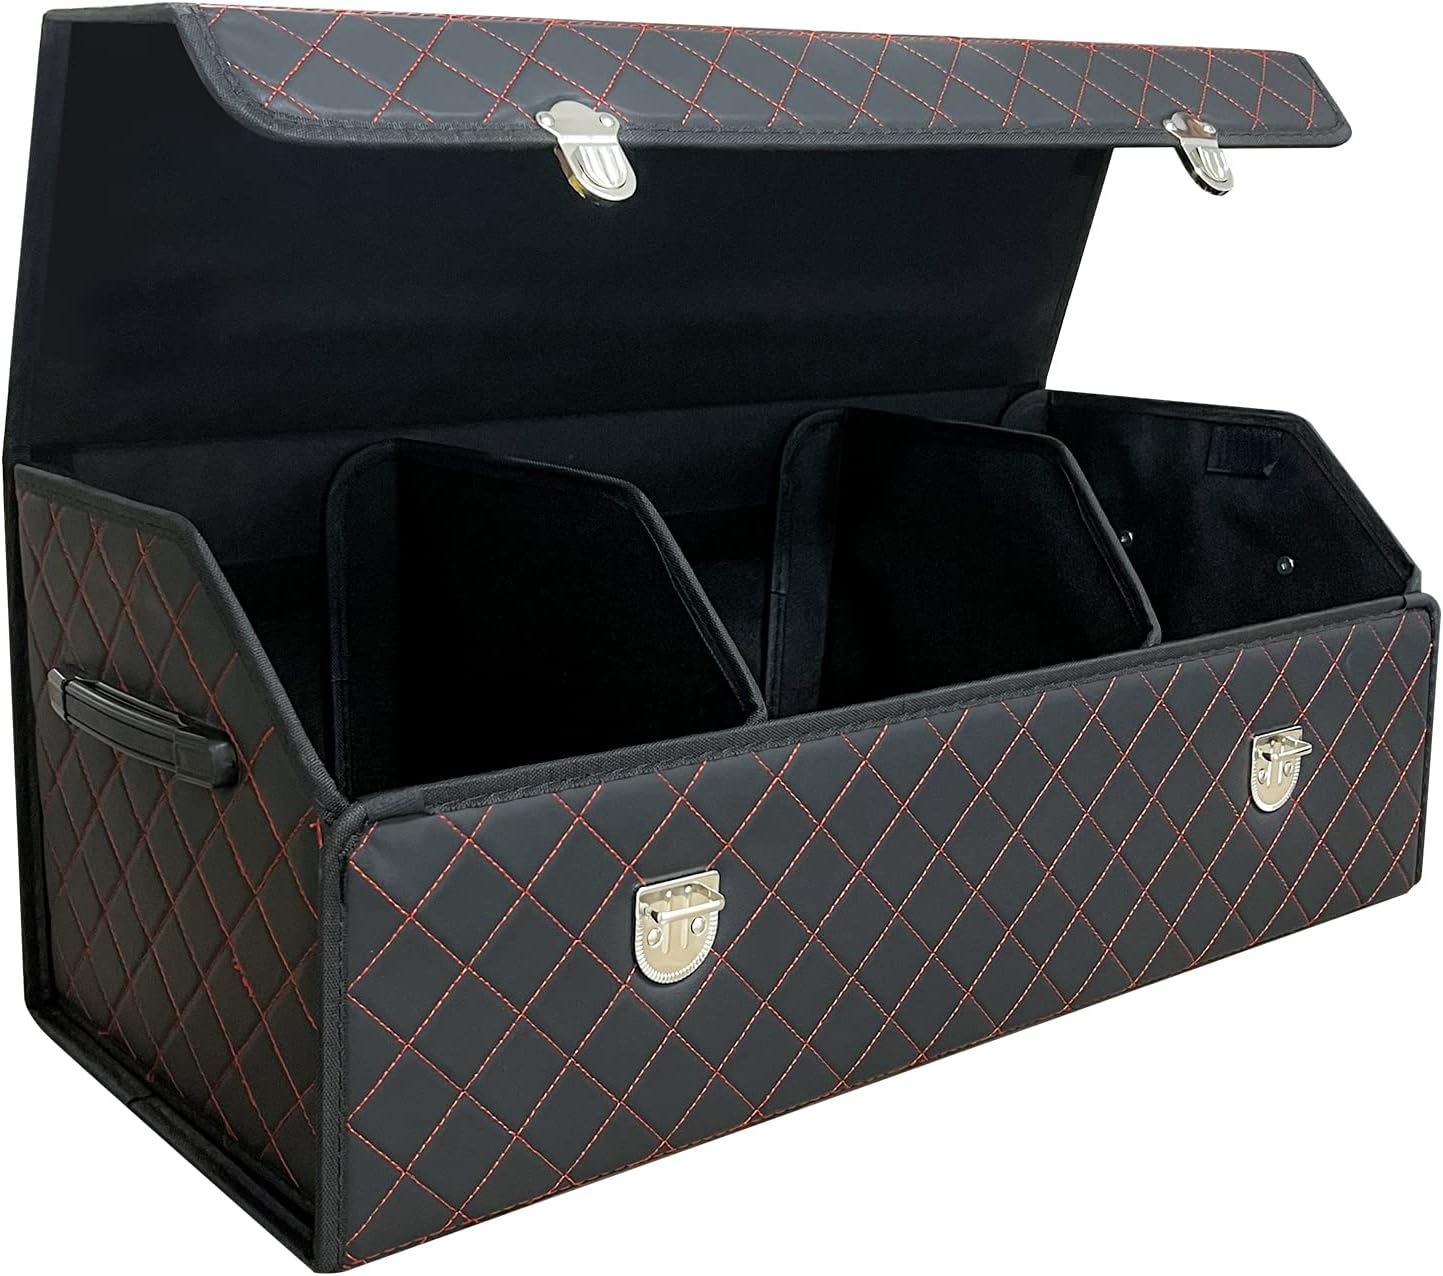 Blushbees Car Storage Organizer - Spacious, Durable, and Foldable 